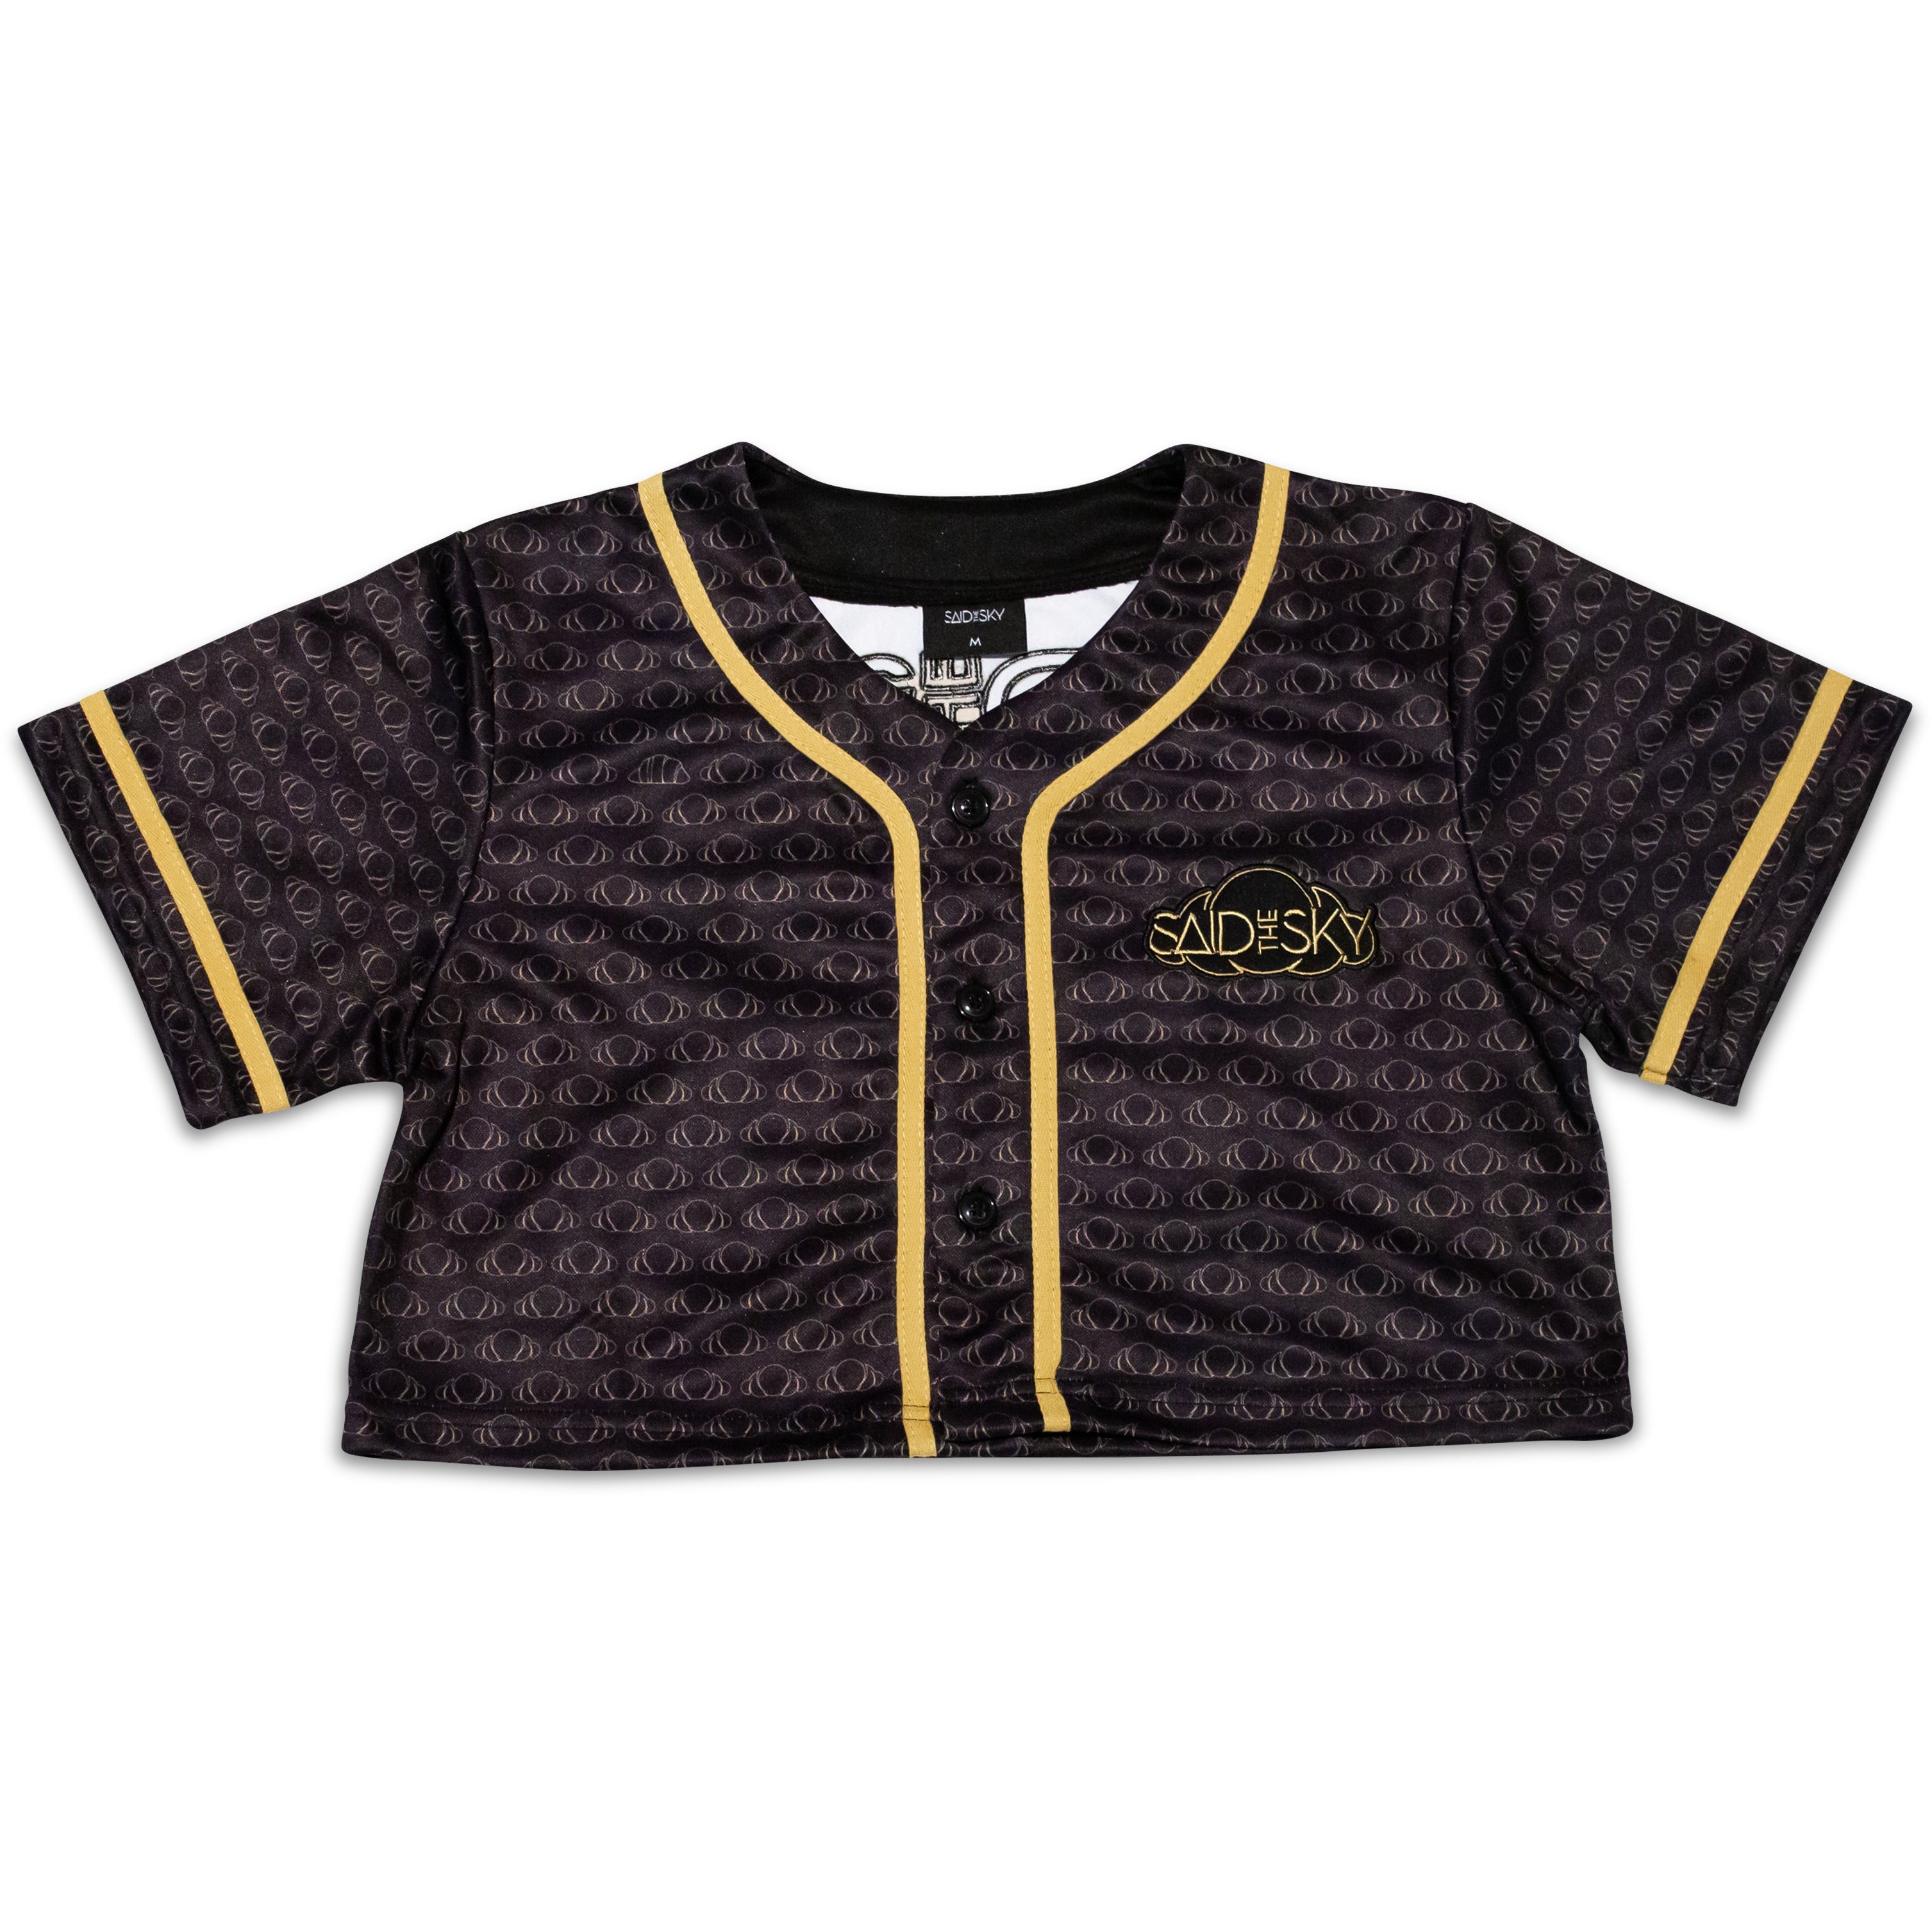 STS Women Crop Jersey / Black - Crop Jersey -  Said the Sky-  Electric Family Official Artist Merchandise